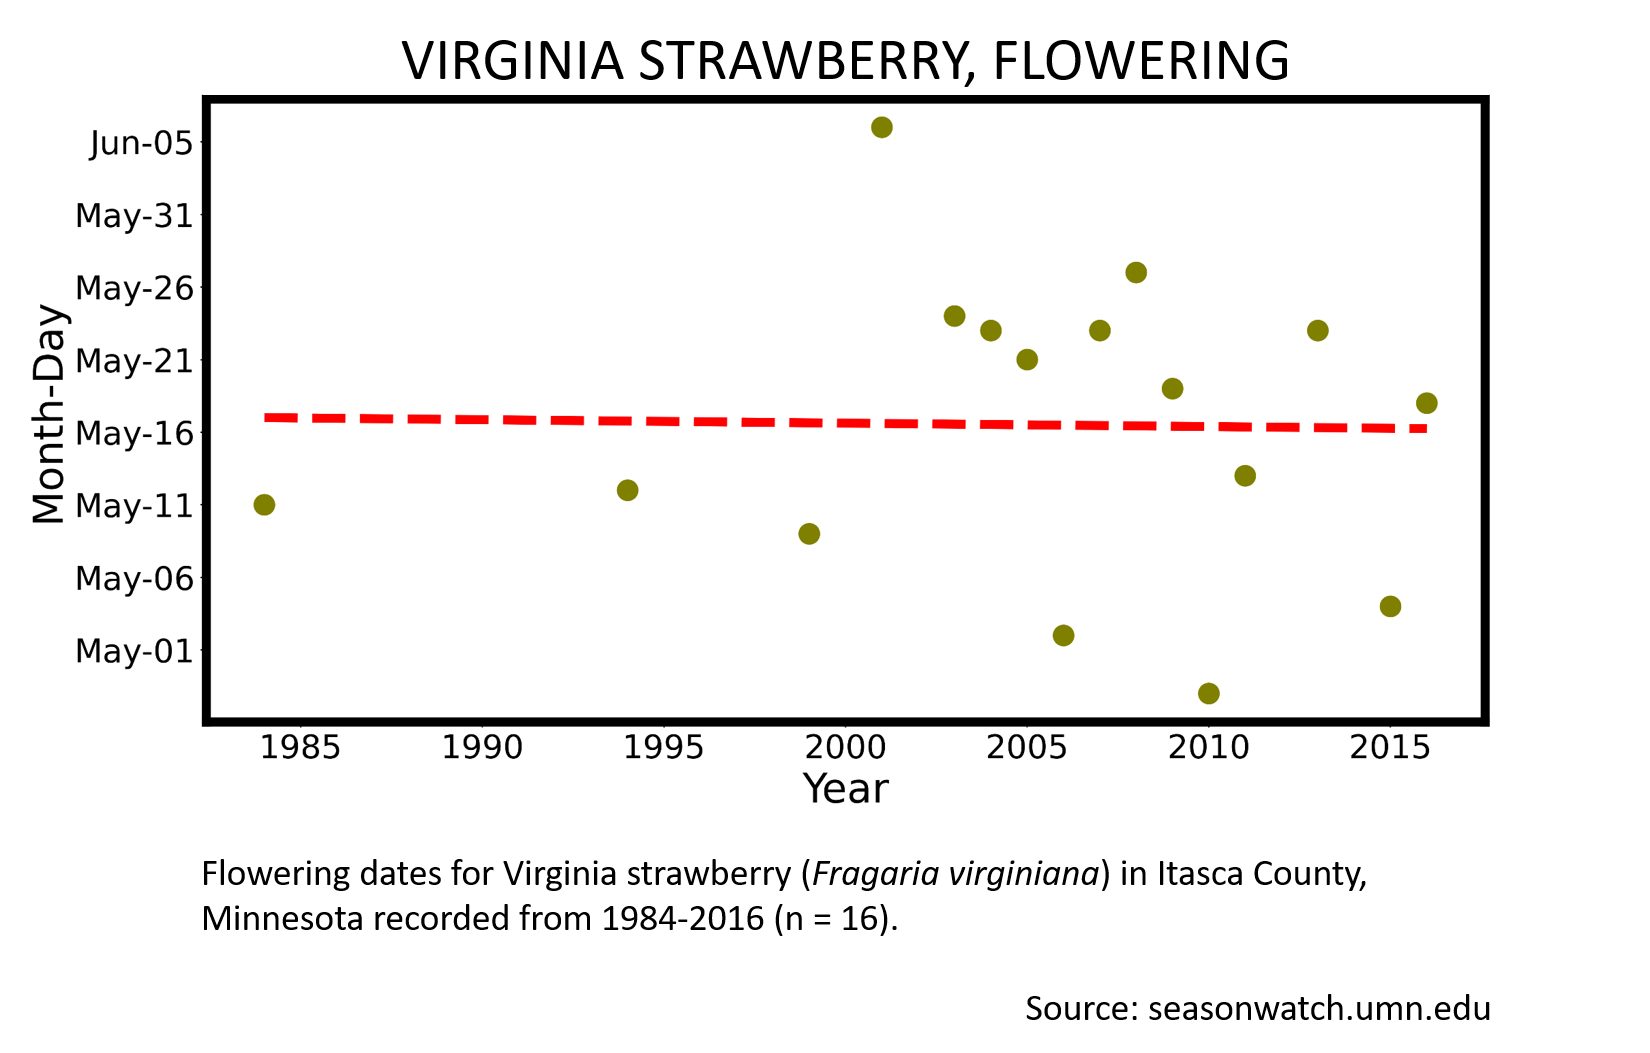 Scatterplot showing Virginia strawberry phenology observations in Itasca County, Minnesota